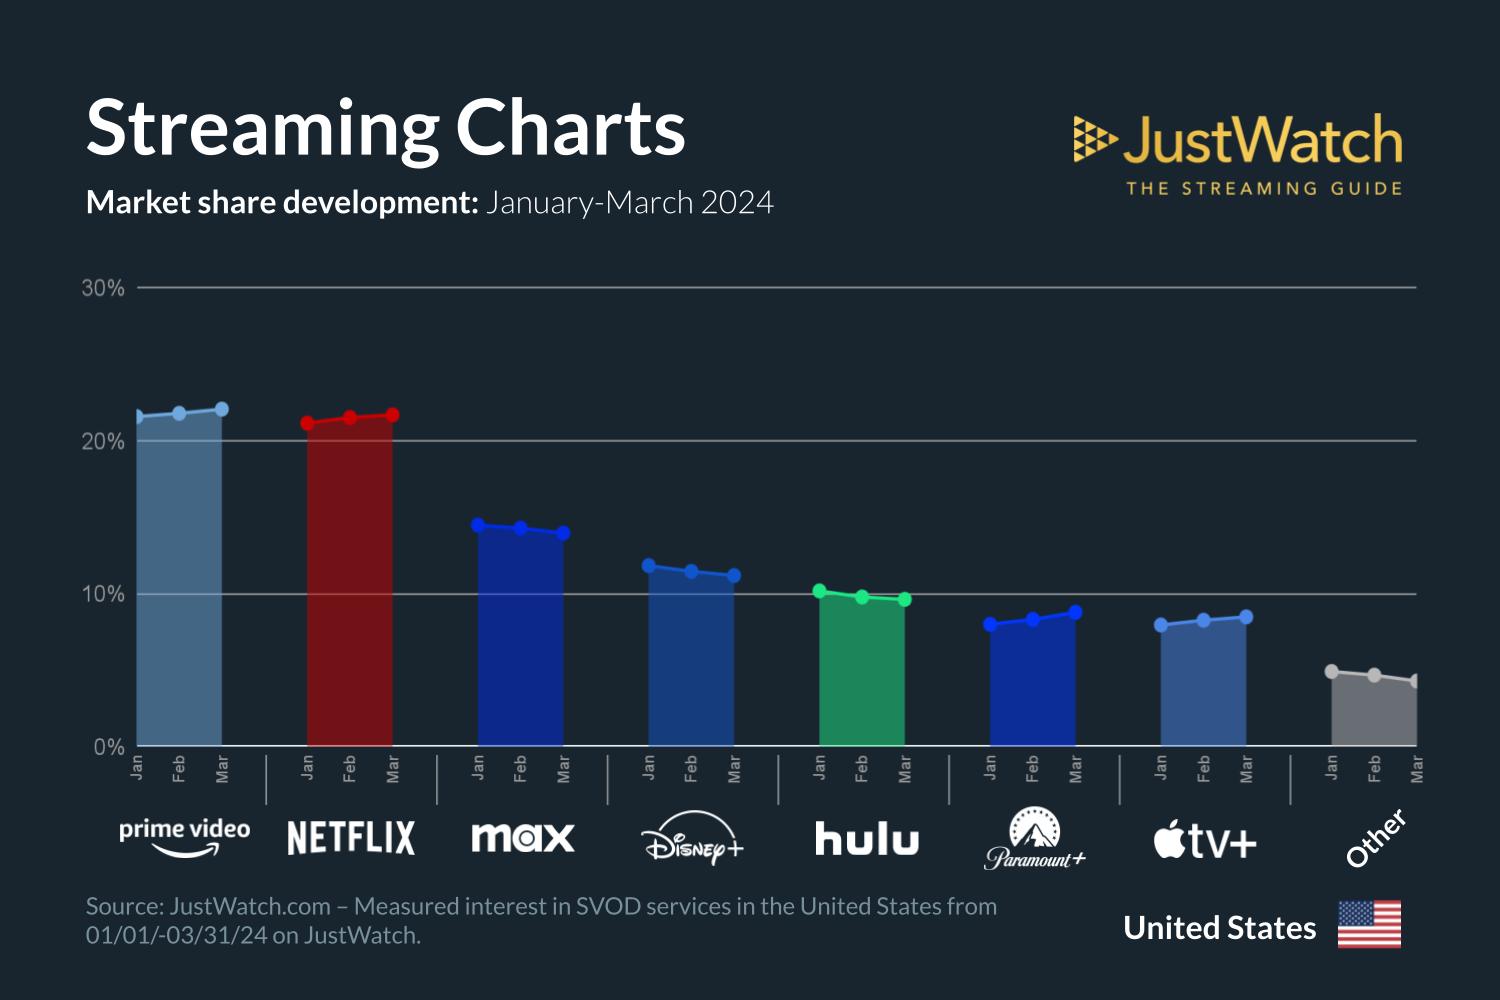 Apple TV+ share grows in the US, but still lags behind its competitors